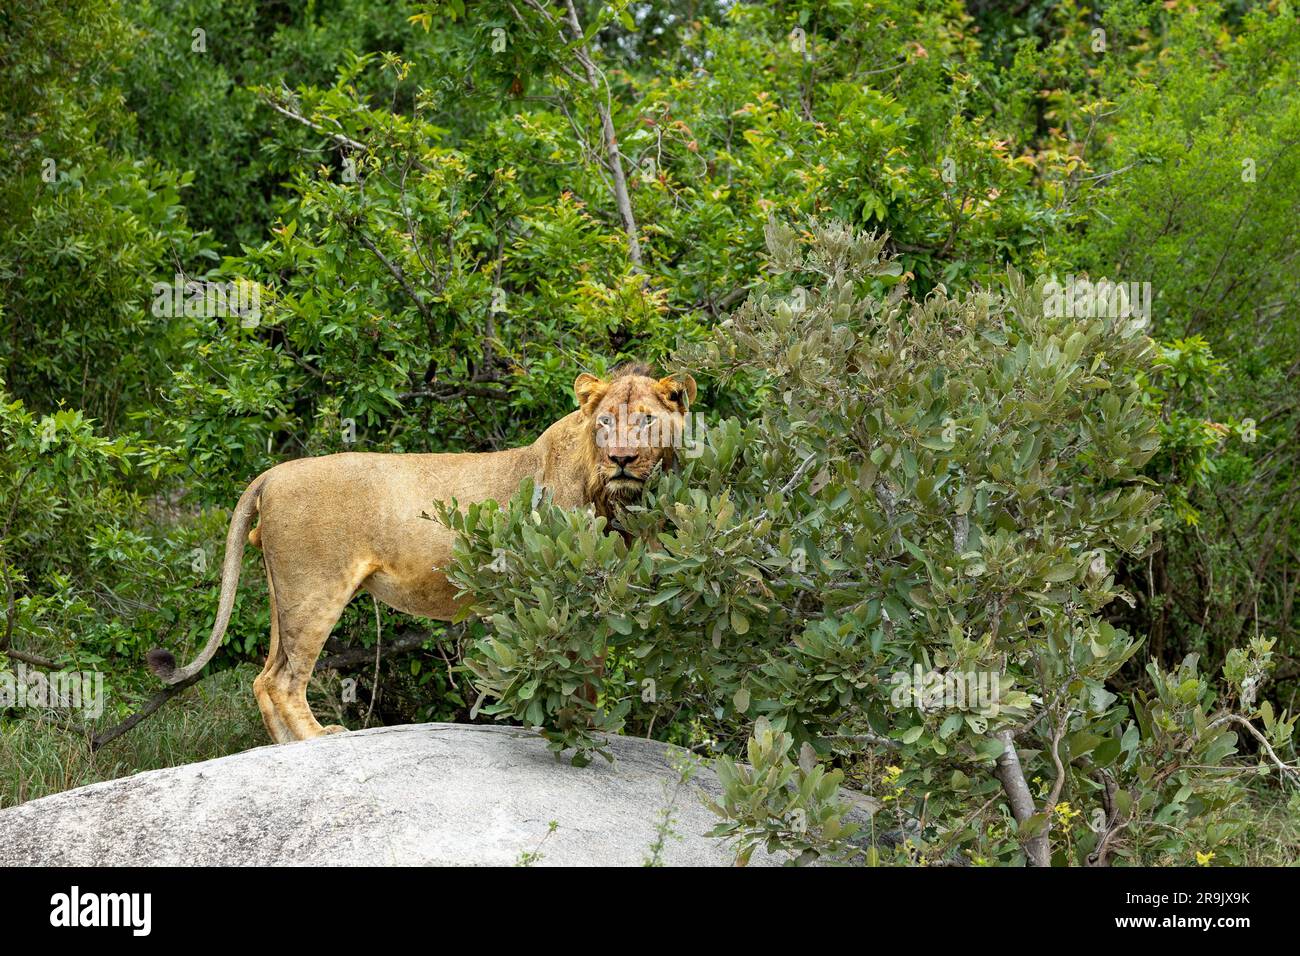 A sub adult lion, Panthera leo, standing on a rock. Stock Photo